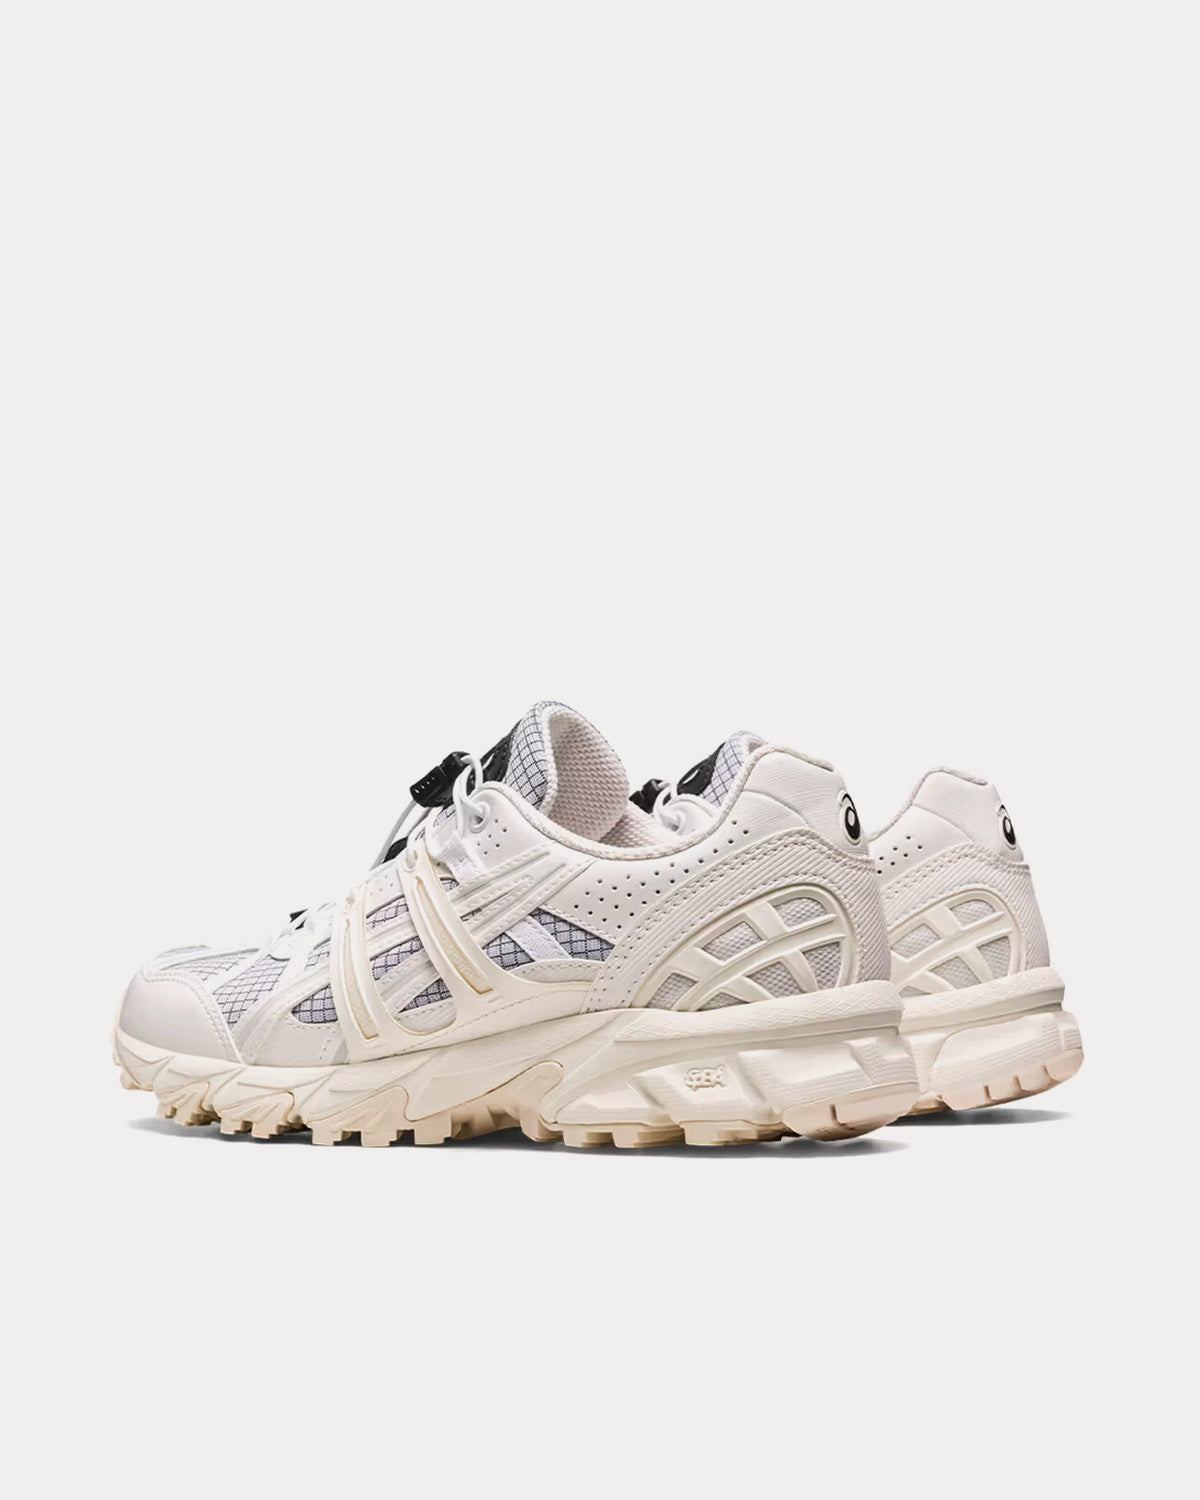 Asics x Matin Kim - Gel-Sonoma 15-50 'Tracing Ego' White Low Top Sneakers